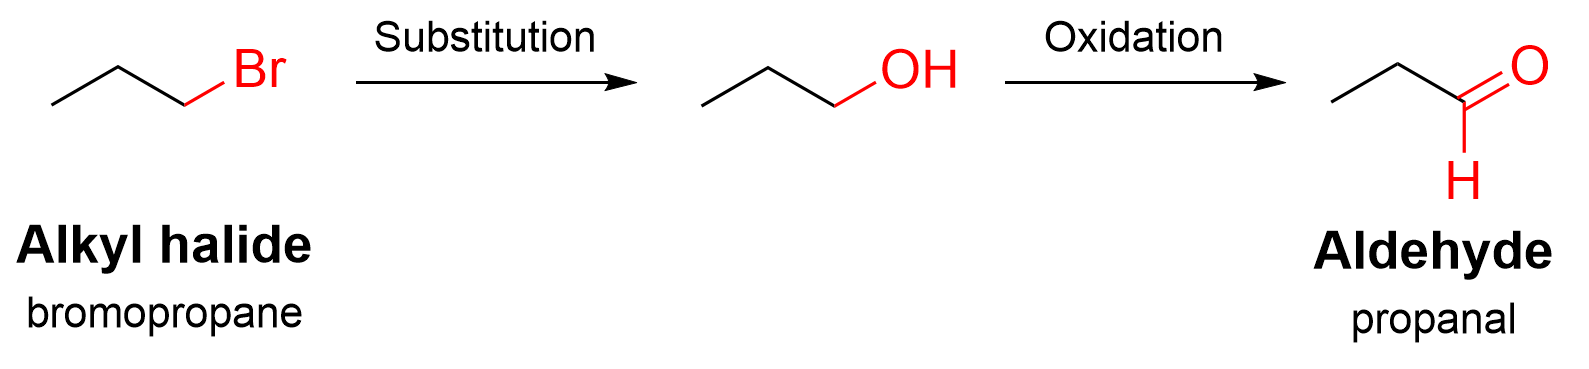 Bromopropane undergoes substitution to form propan-2-ol, which oxidizes to form propanol.